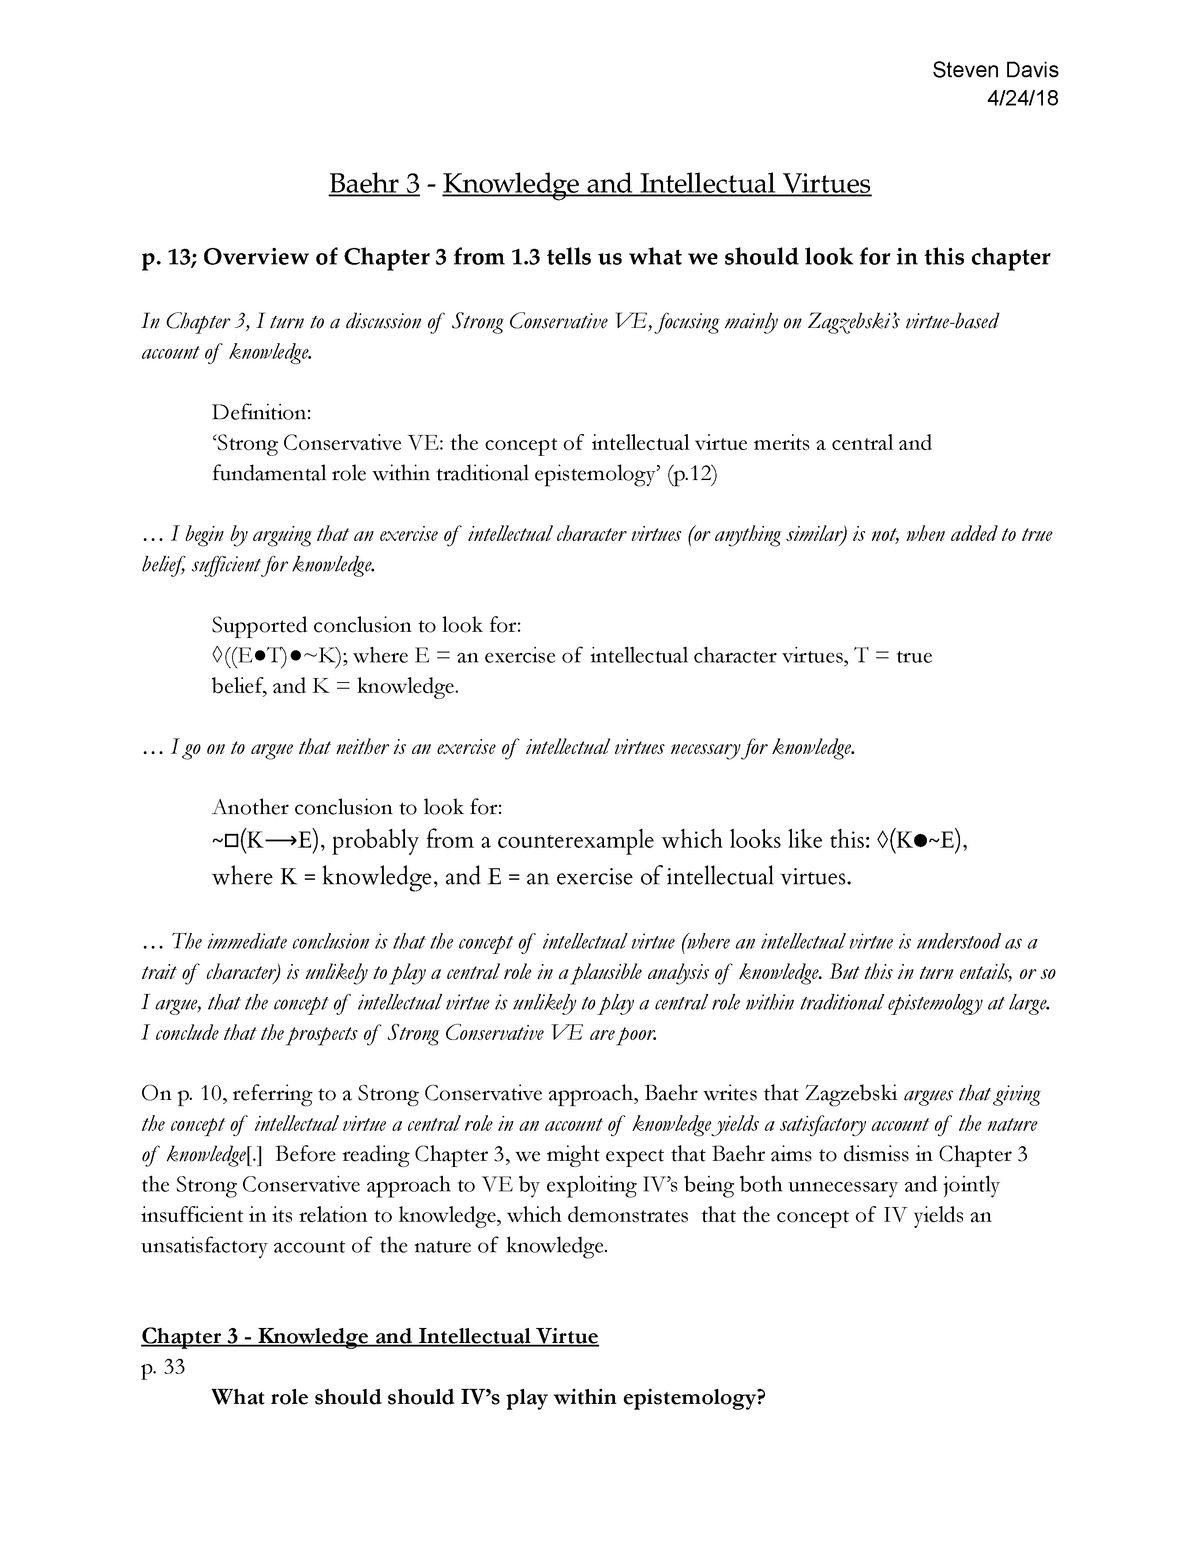 PHIL410 Baehroutline Detailed outline of assigned reading from spring